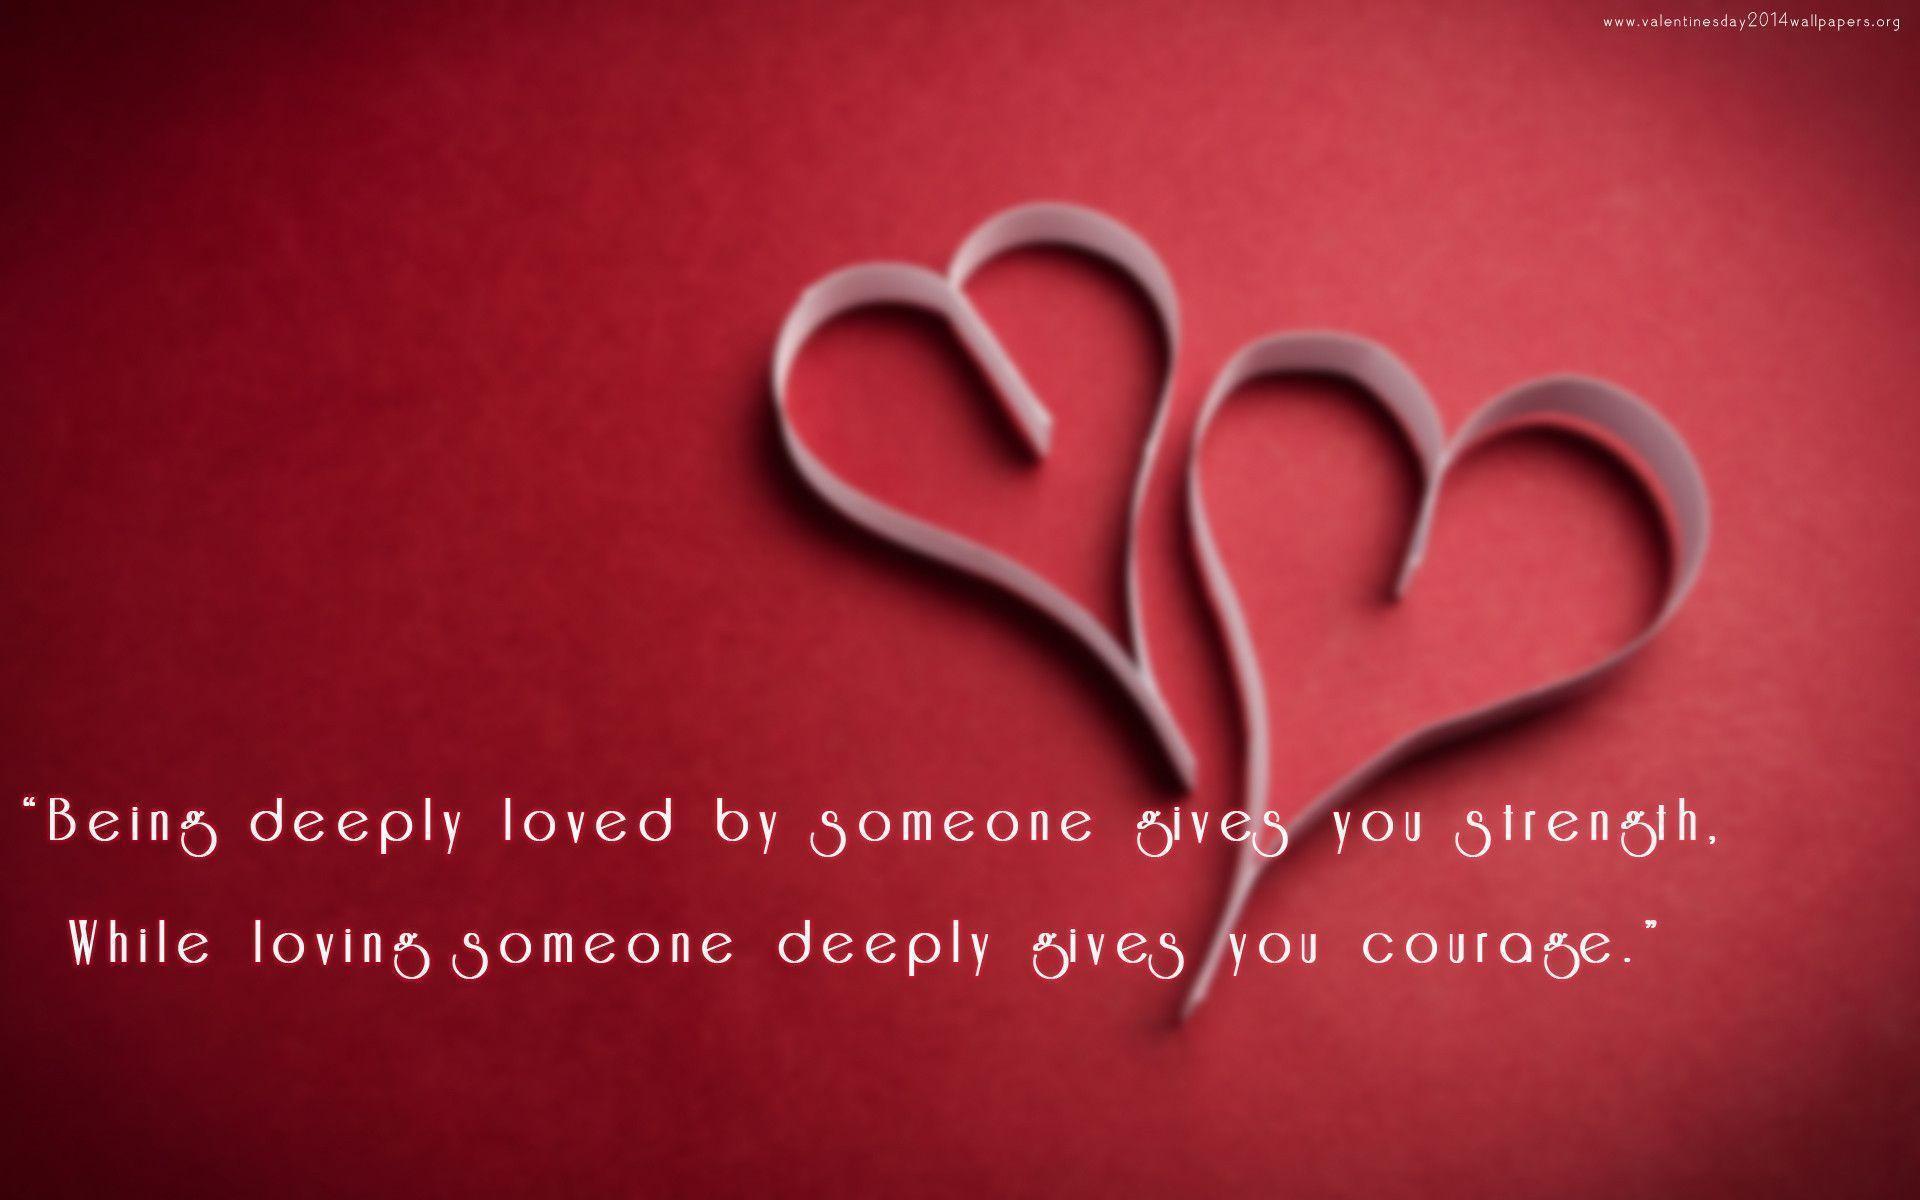 Download Happy valentines day 2014 wallpaper Full HD For Free